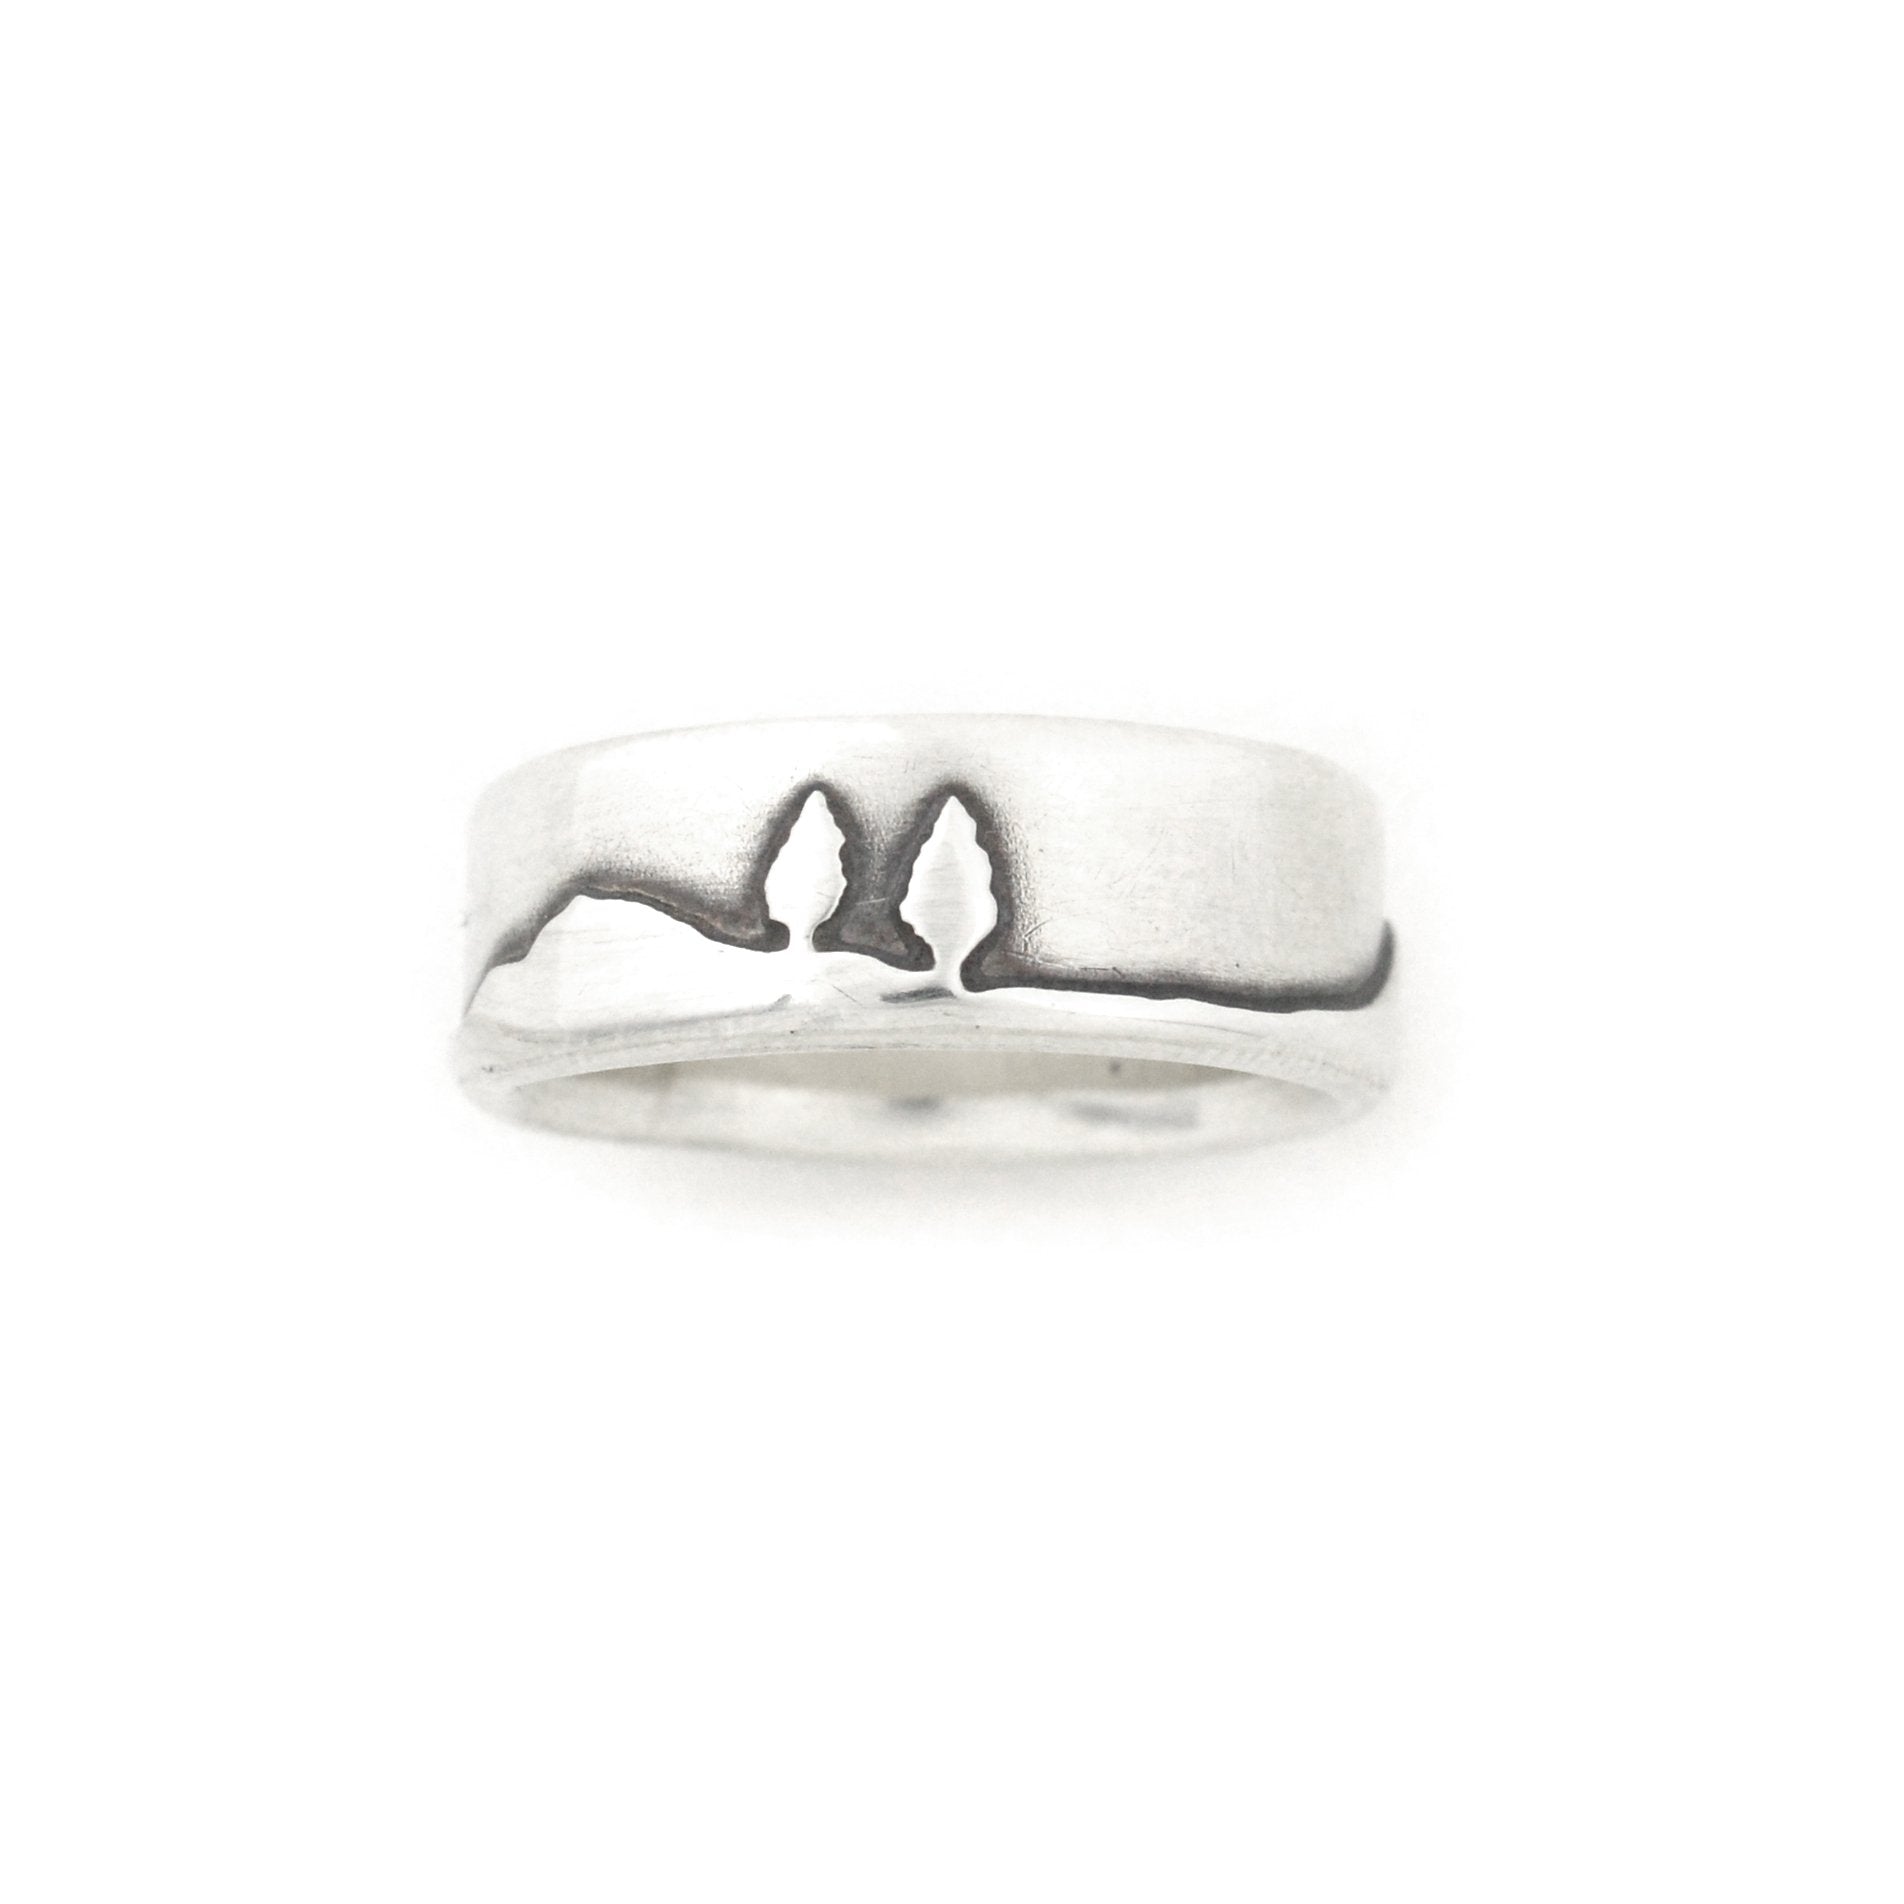 Silver Shoreline Ring - Wedding Ring  6mm / Select Size  6mm / 4 2762 - handmade by Beth Millner Jewelry